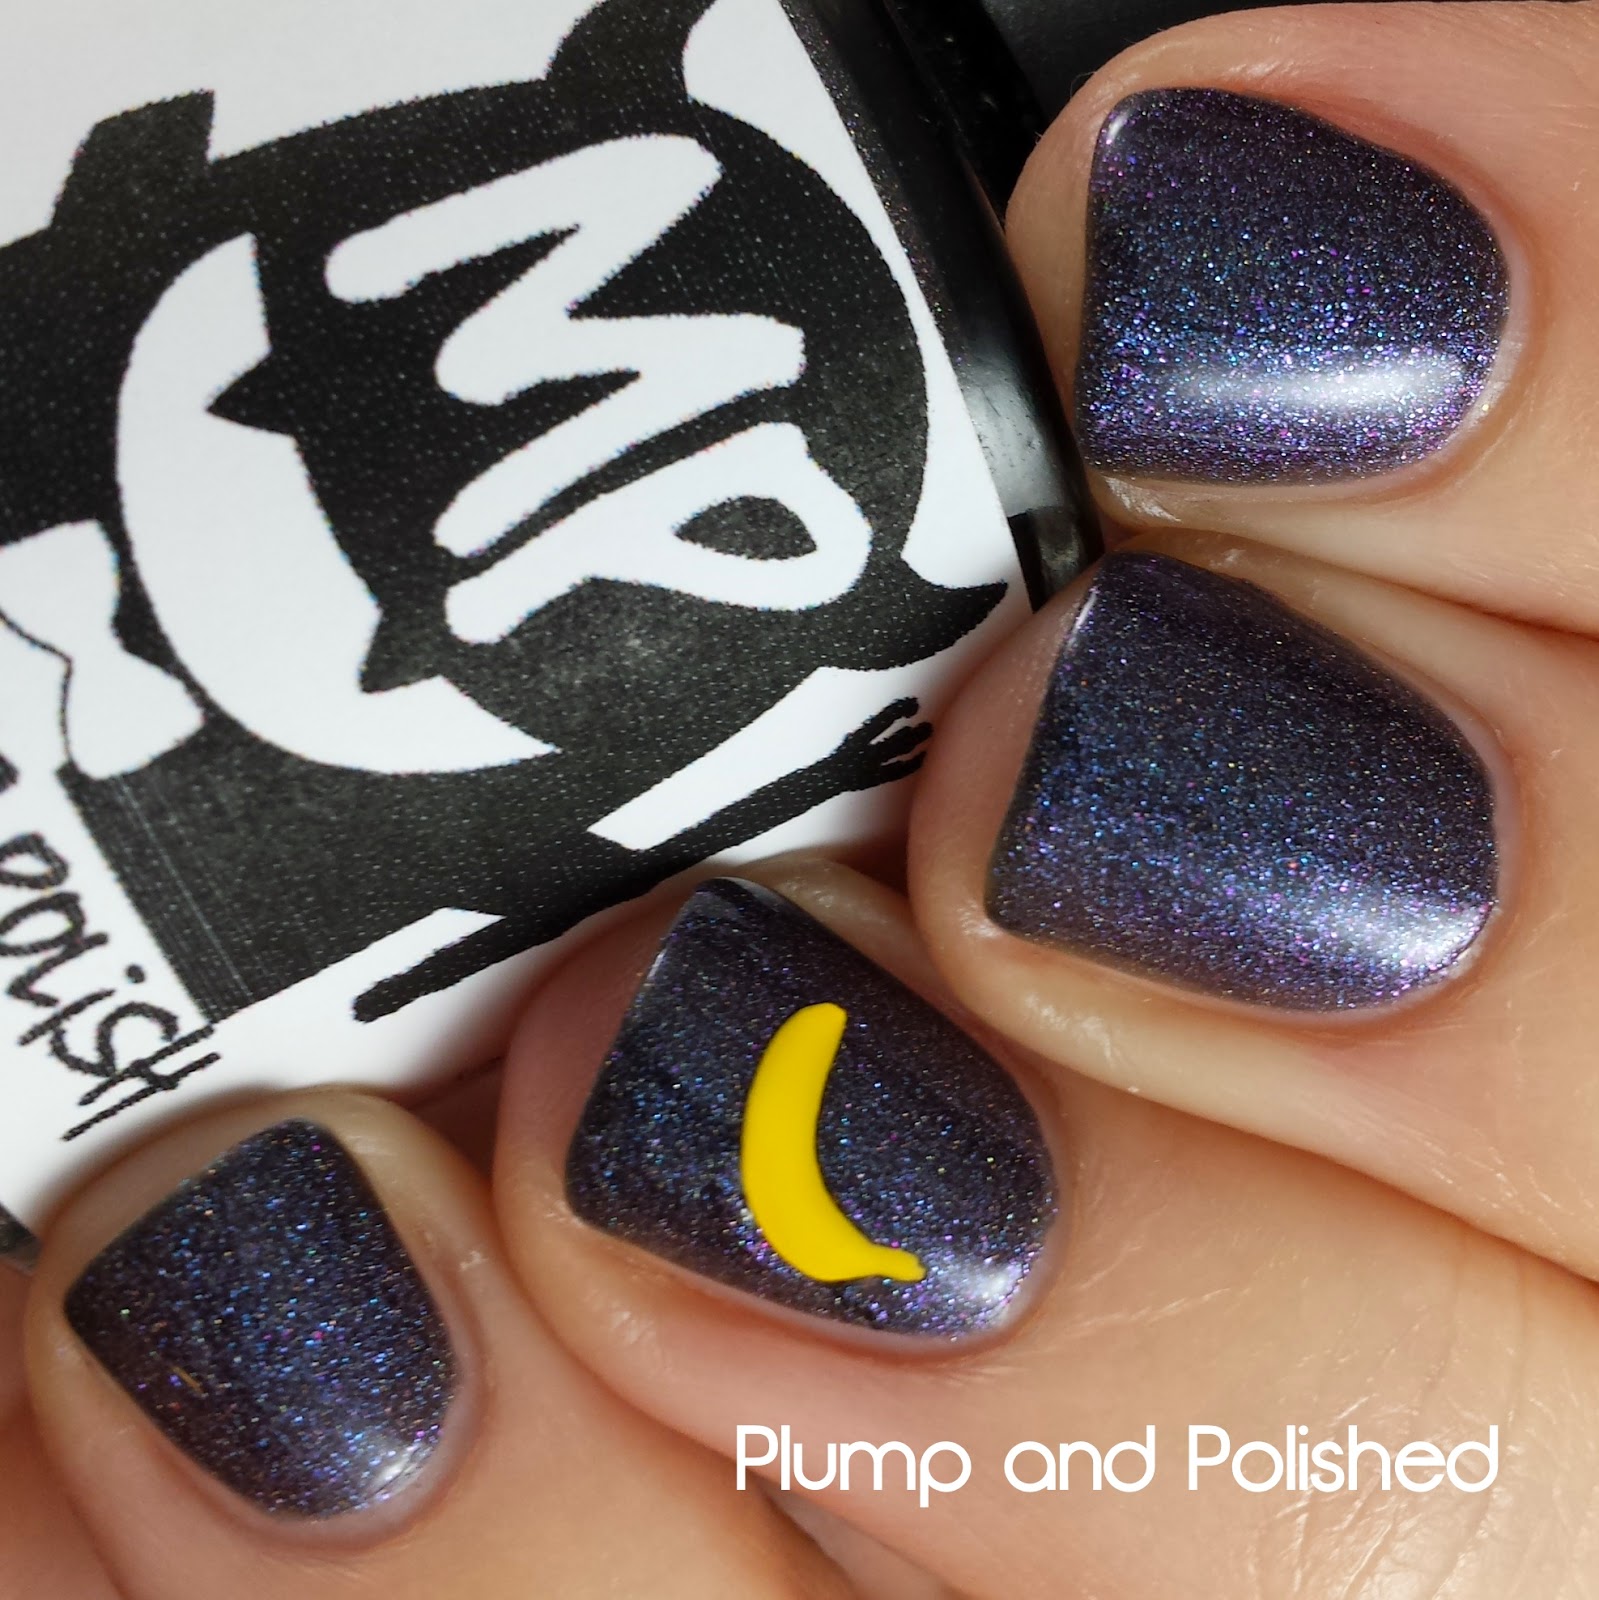 Monster Polish - What’s Wrong With This Jumper?